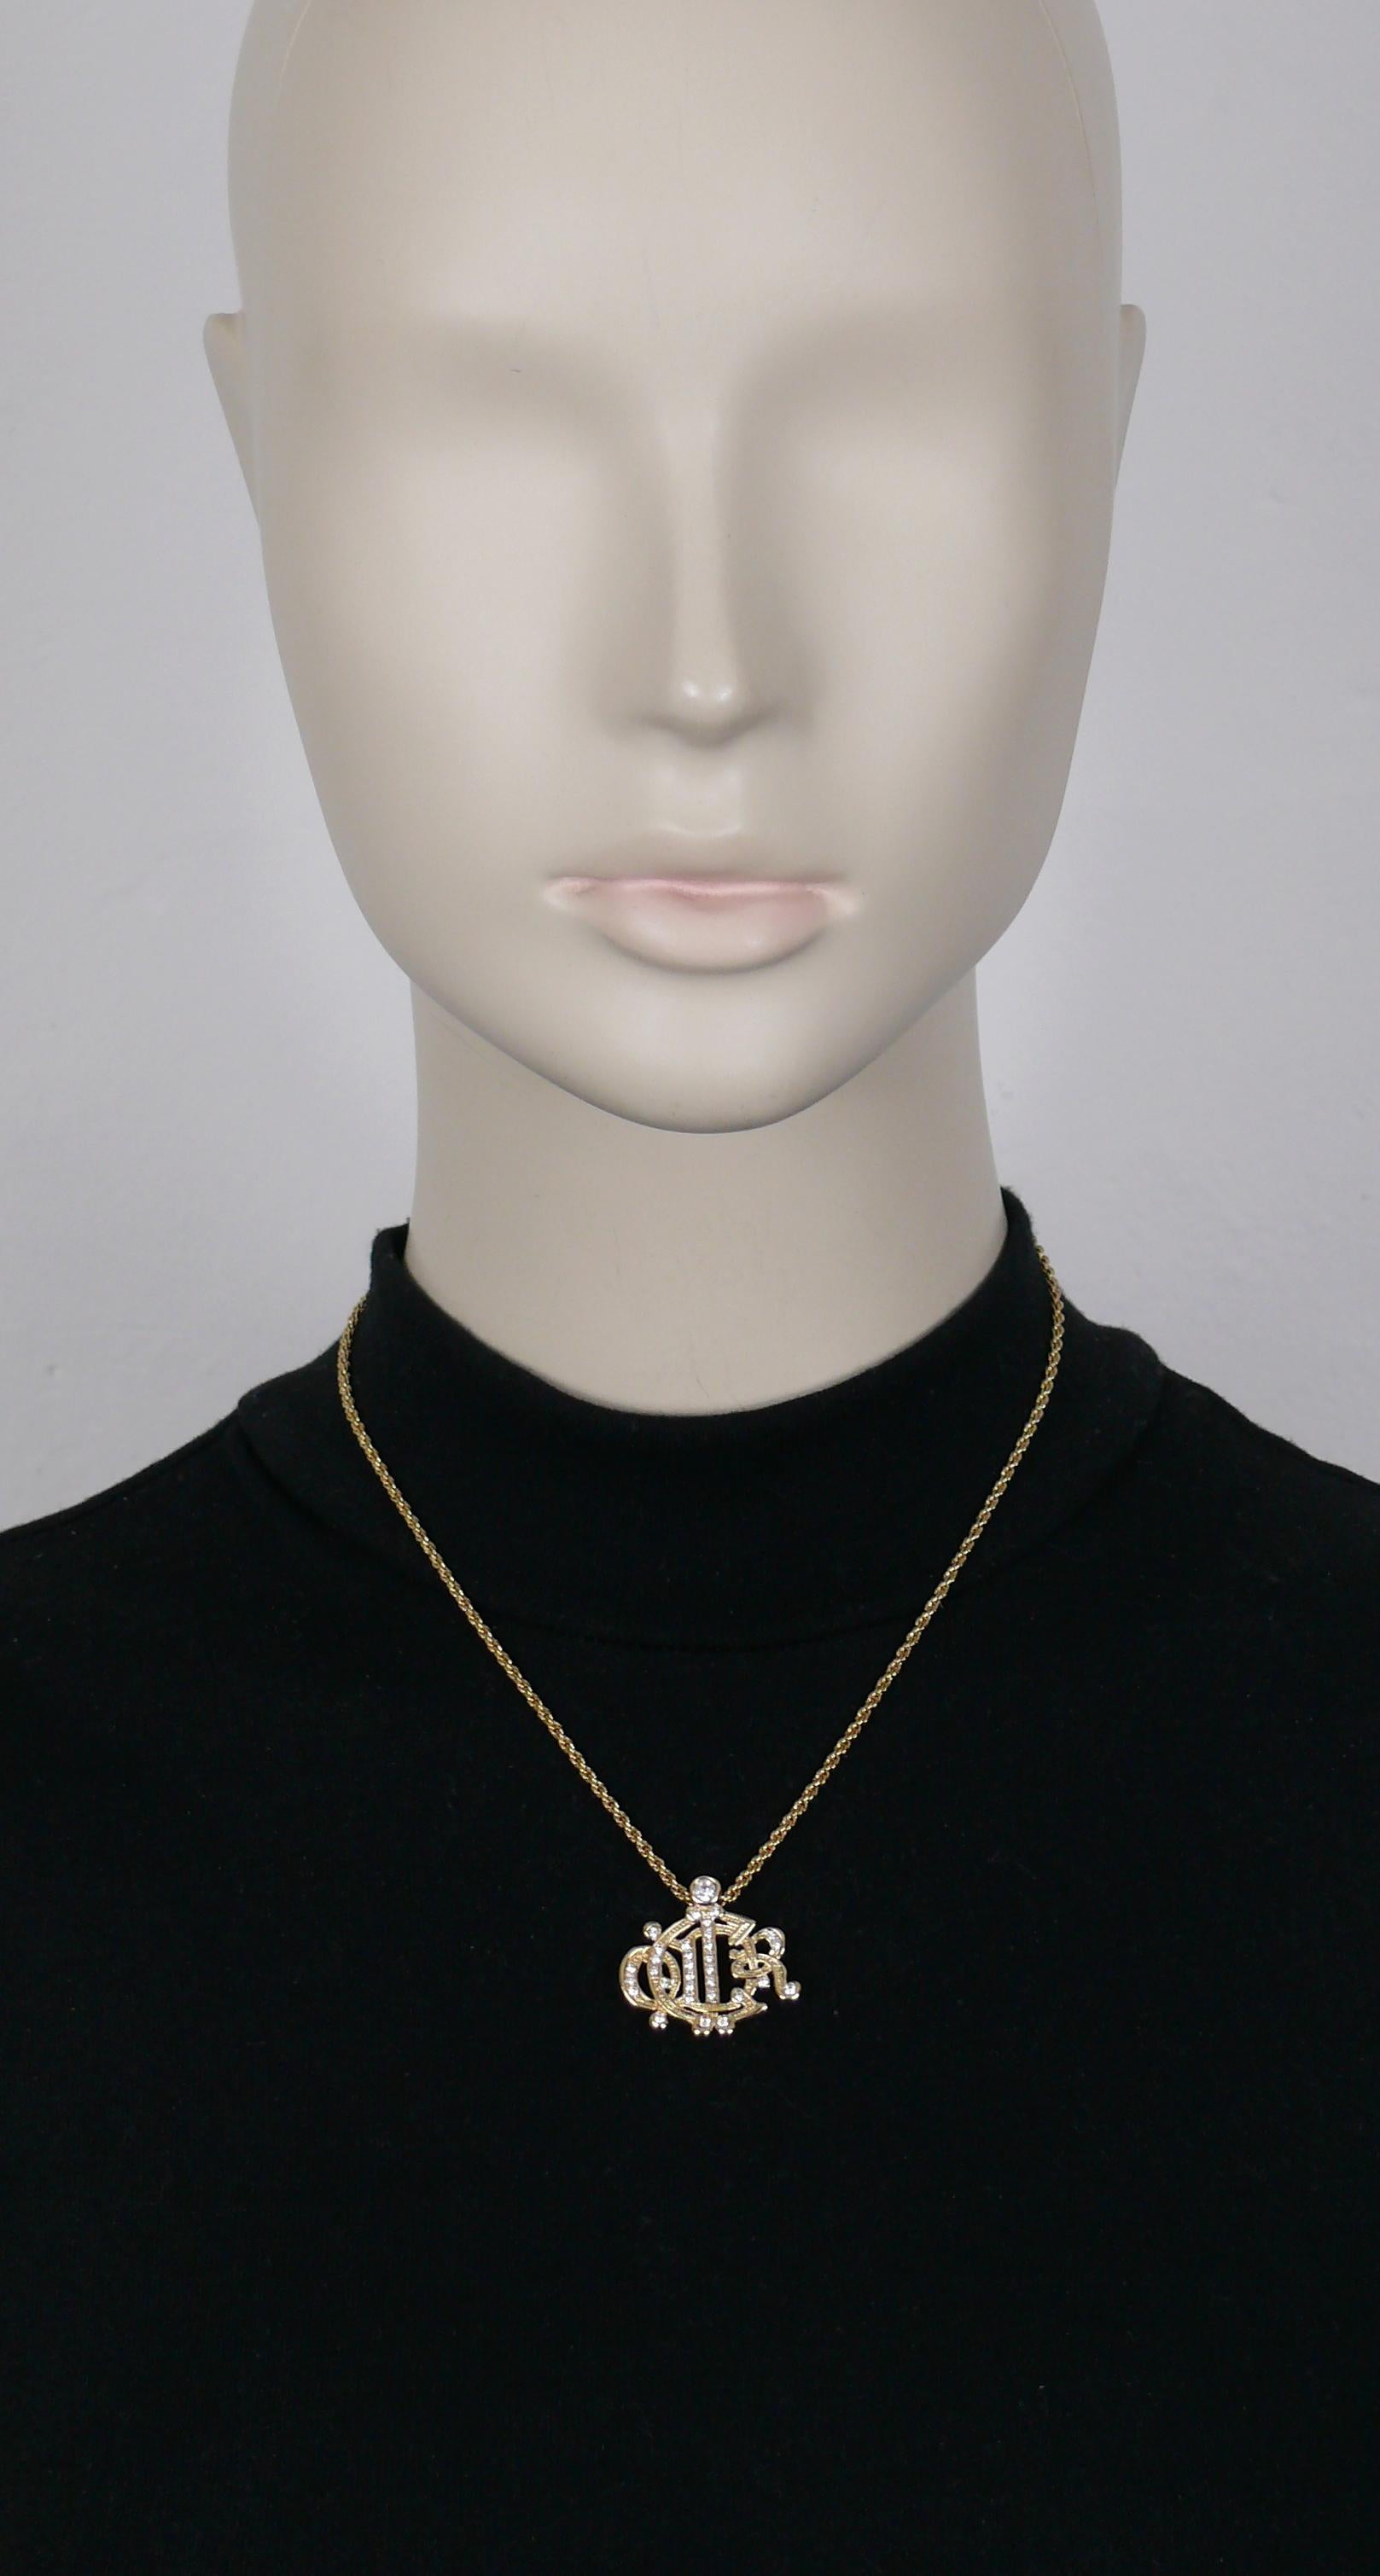 CHRISTIAN DIOR vintage gold tone chain necklace featuring a C DIOR logo pendant embellished with clear crystals.

Adjustable lobster clasp closure.

Embossed CHR. DIOR © GERMANY.

Indicative measurements : chain length from approx. 39.5 cm (15.55